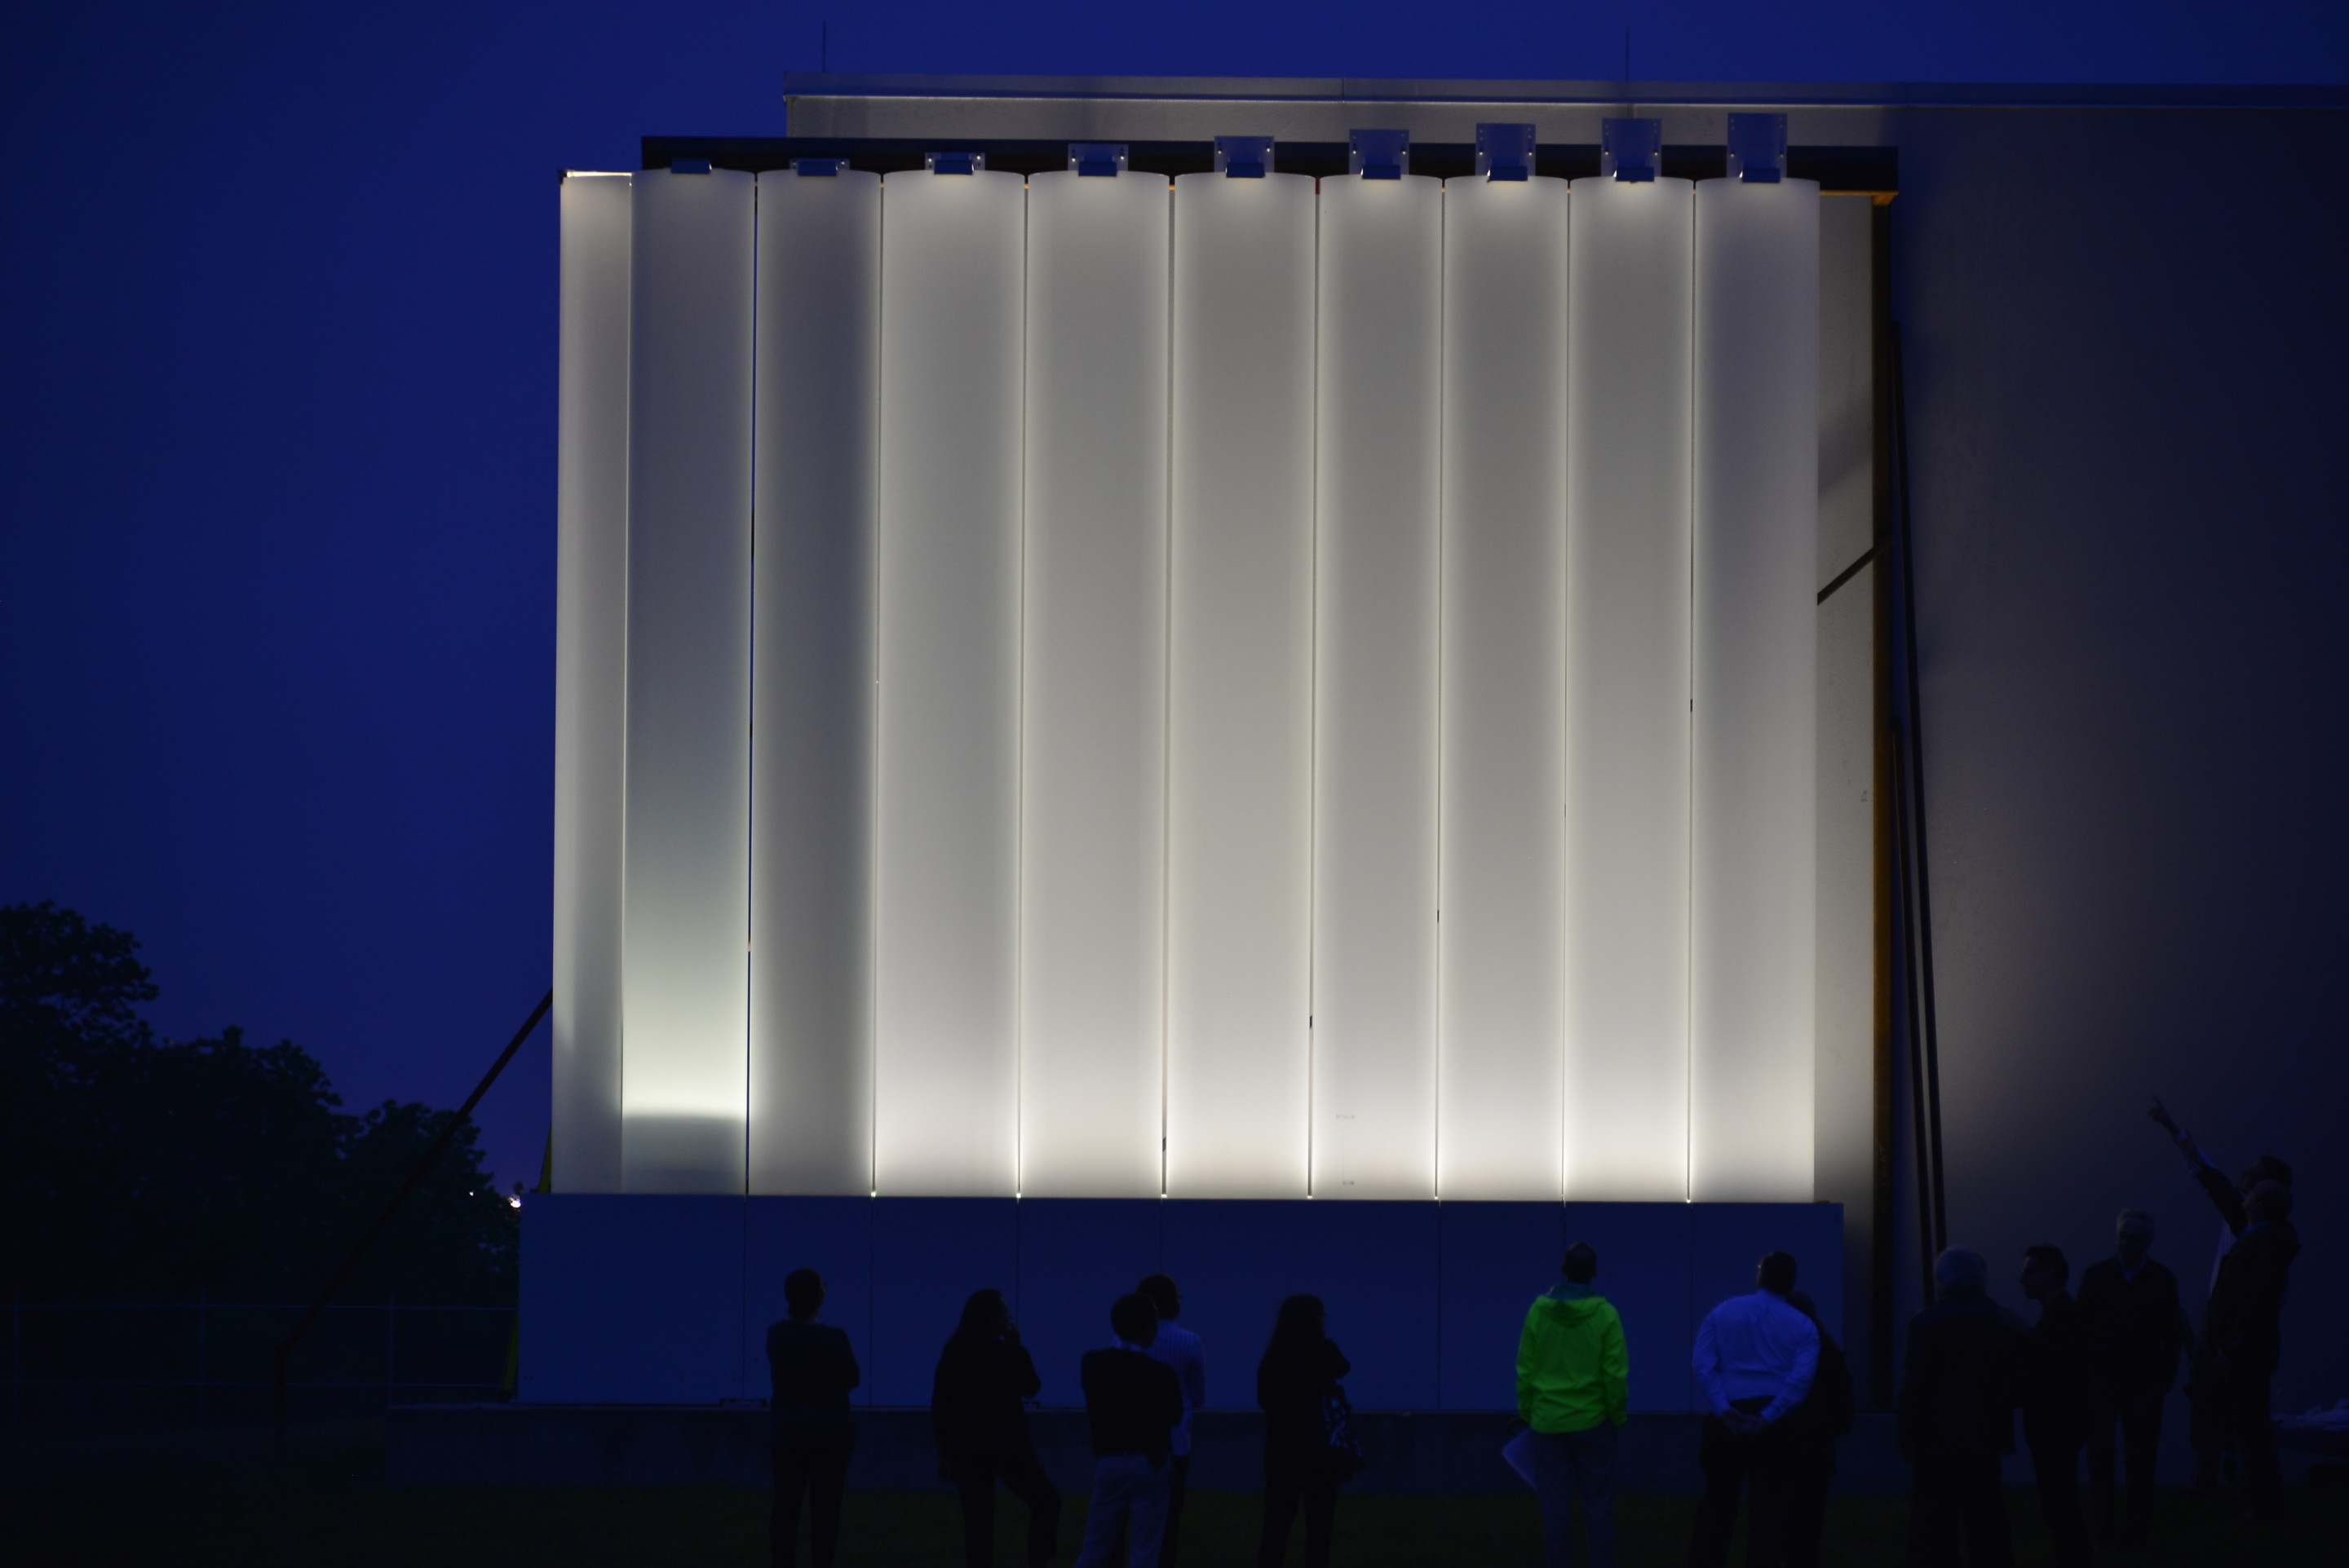 Image of facade mock up at night with lamp-like glow across the kinder building